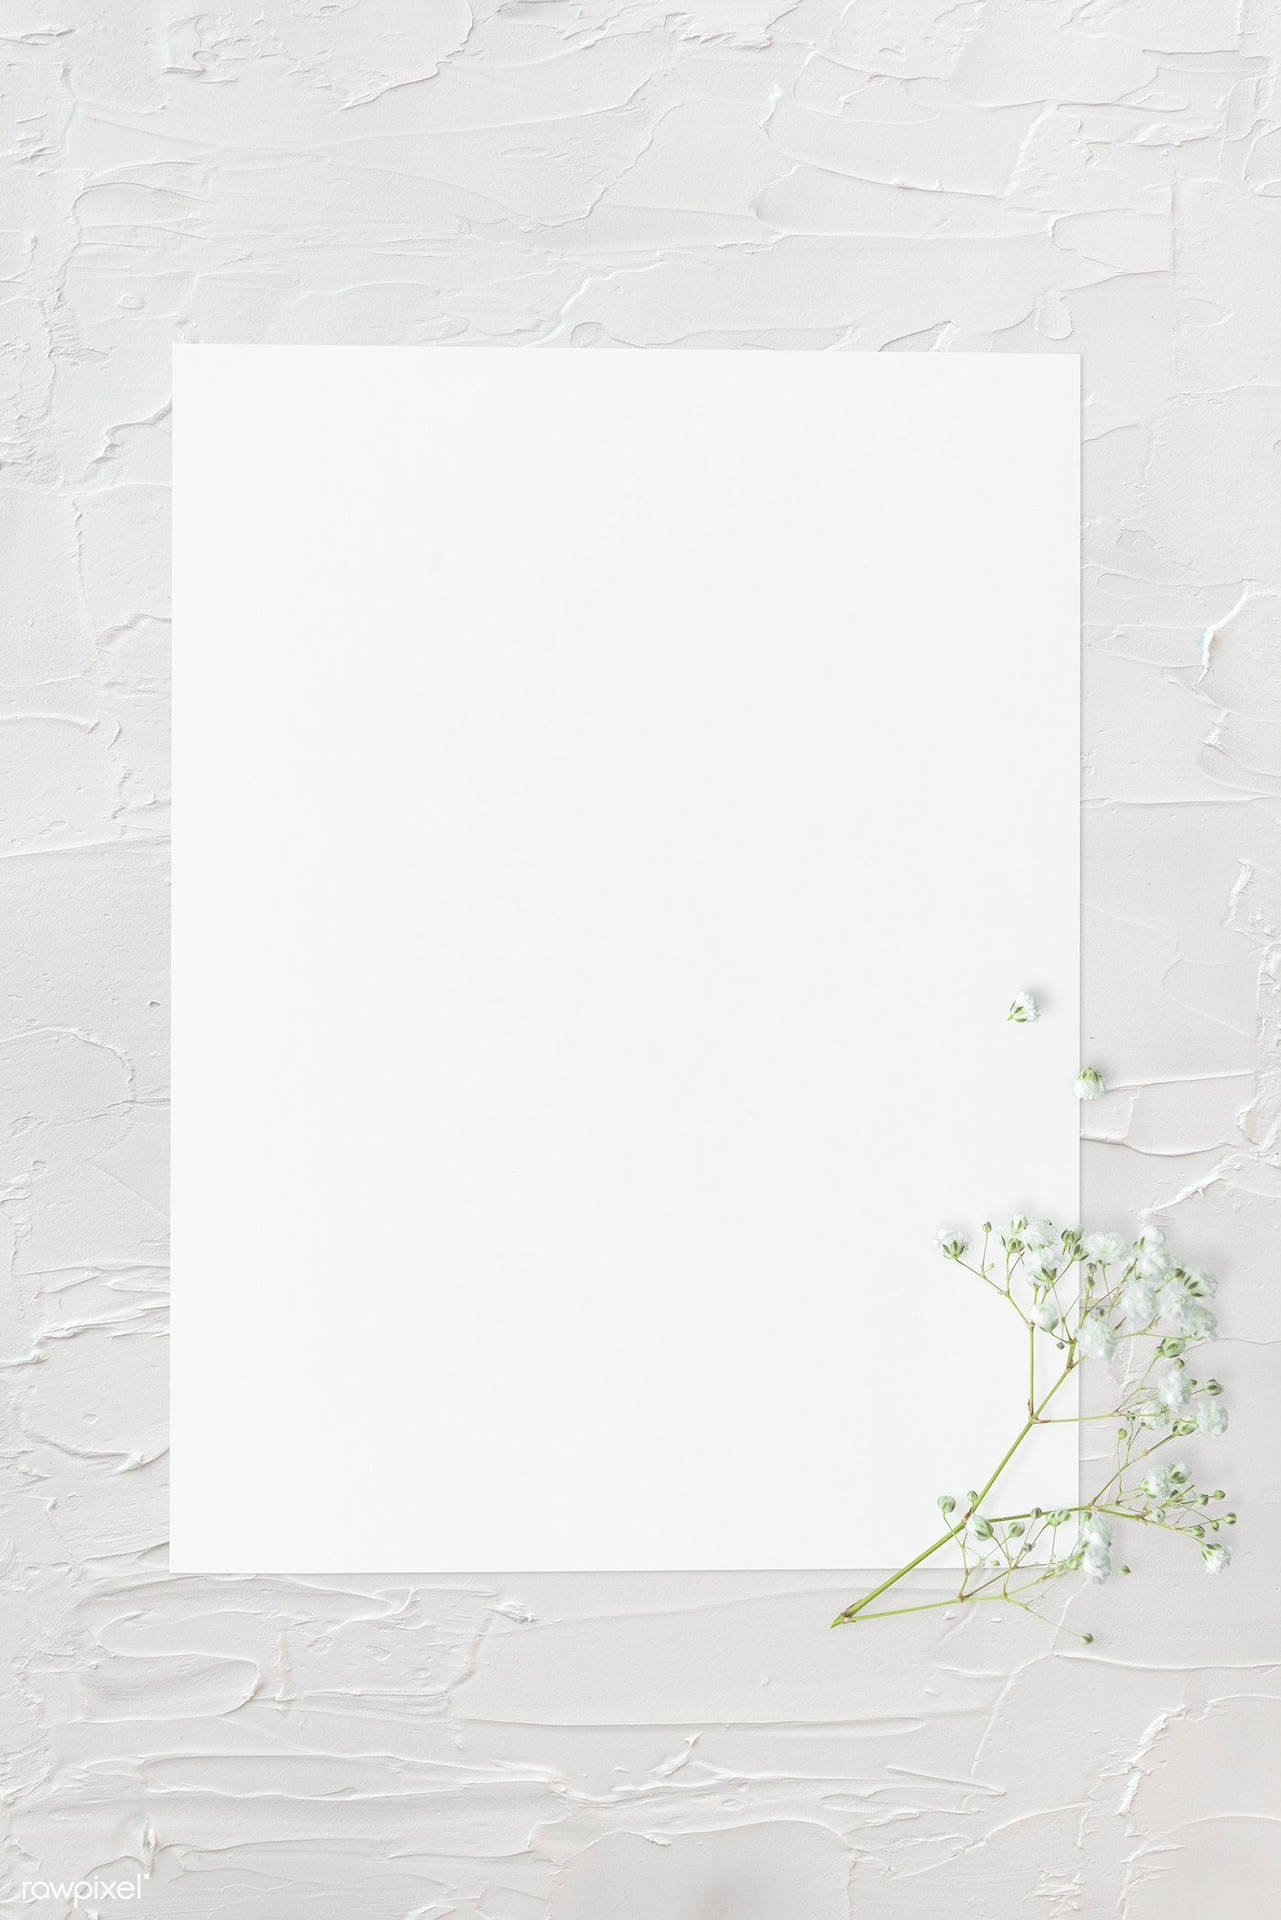 Blank White With Frame And White Flowers